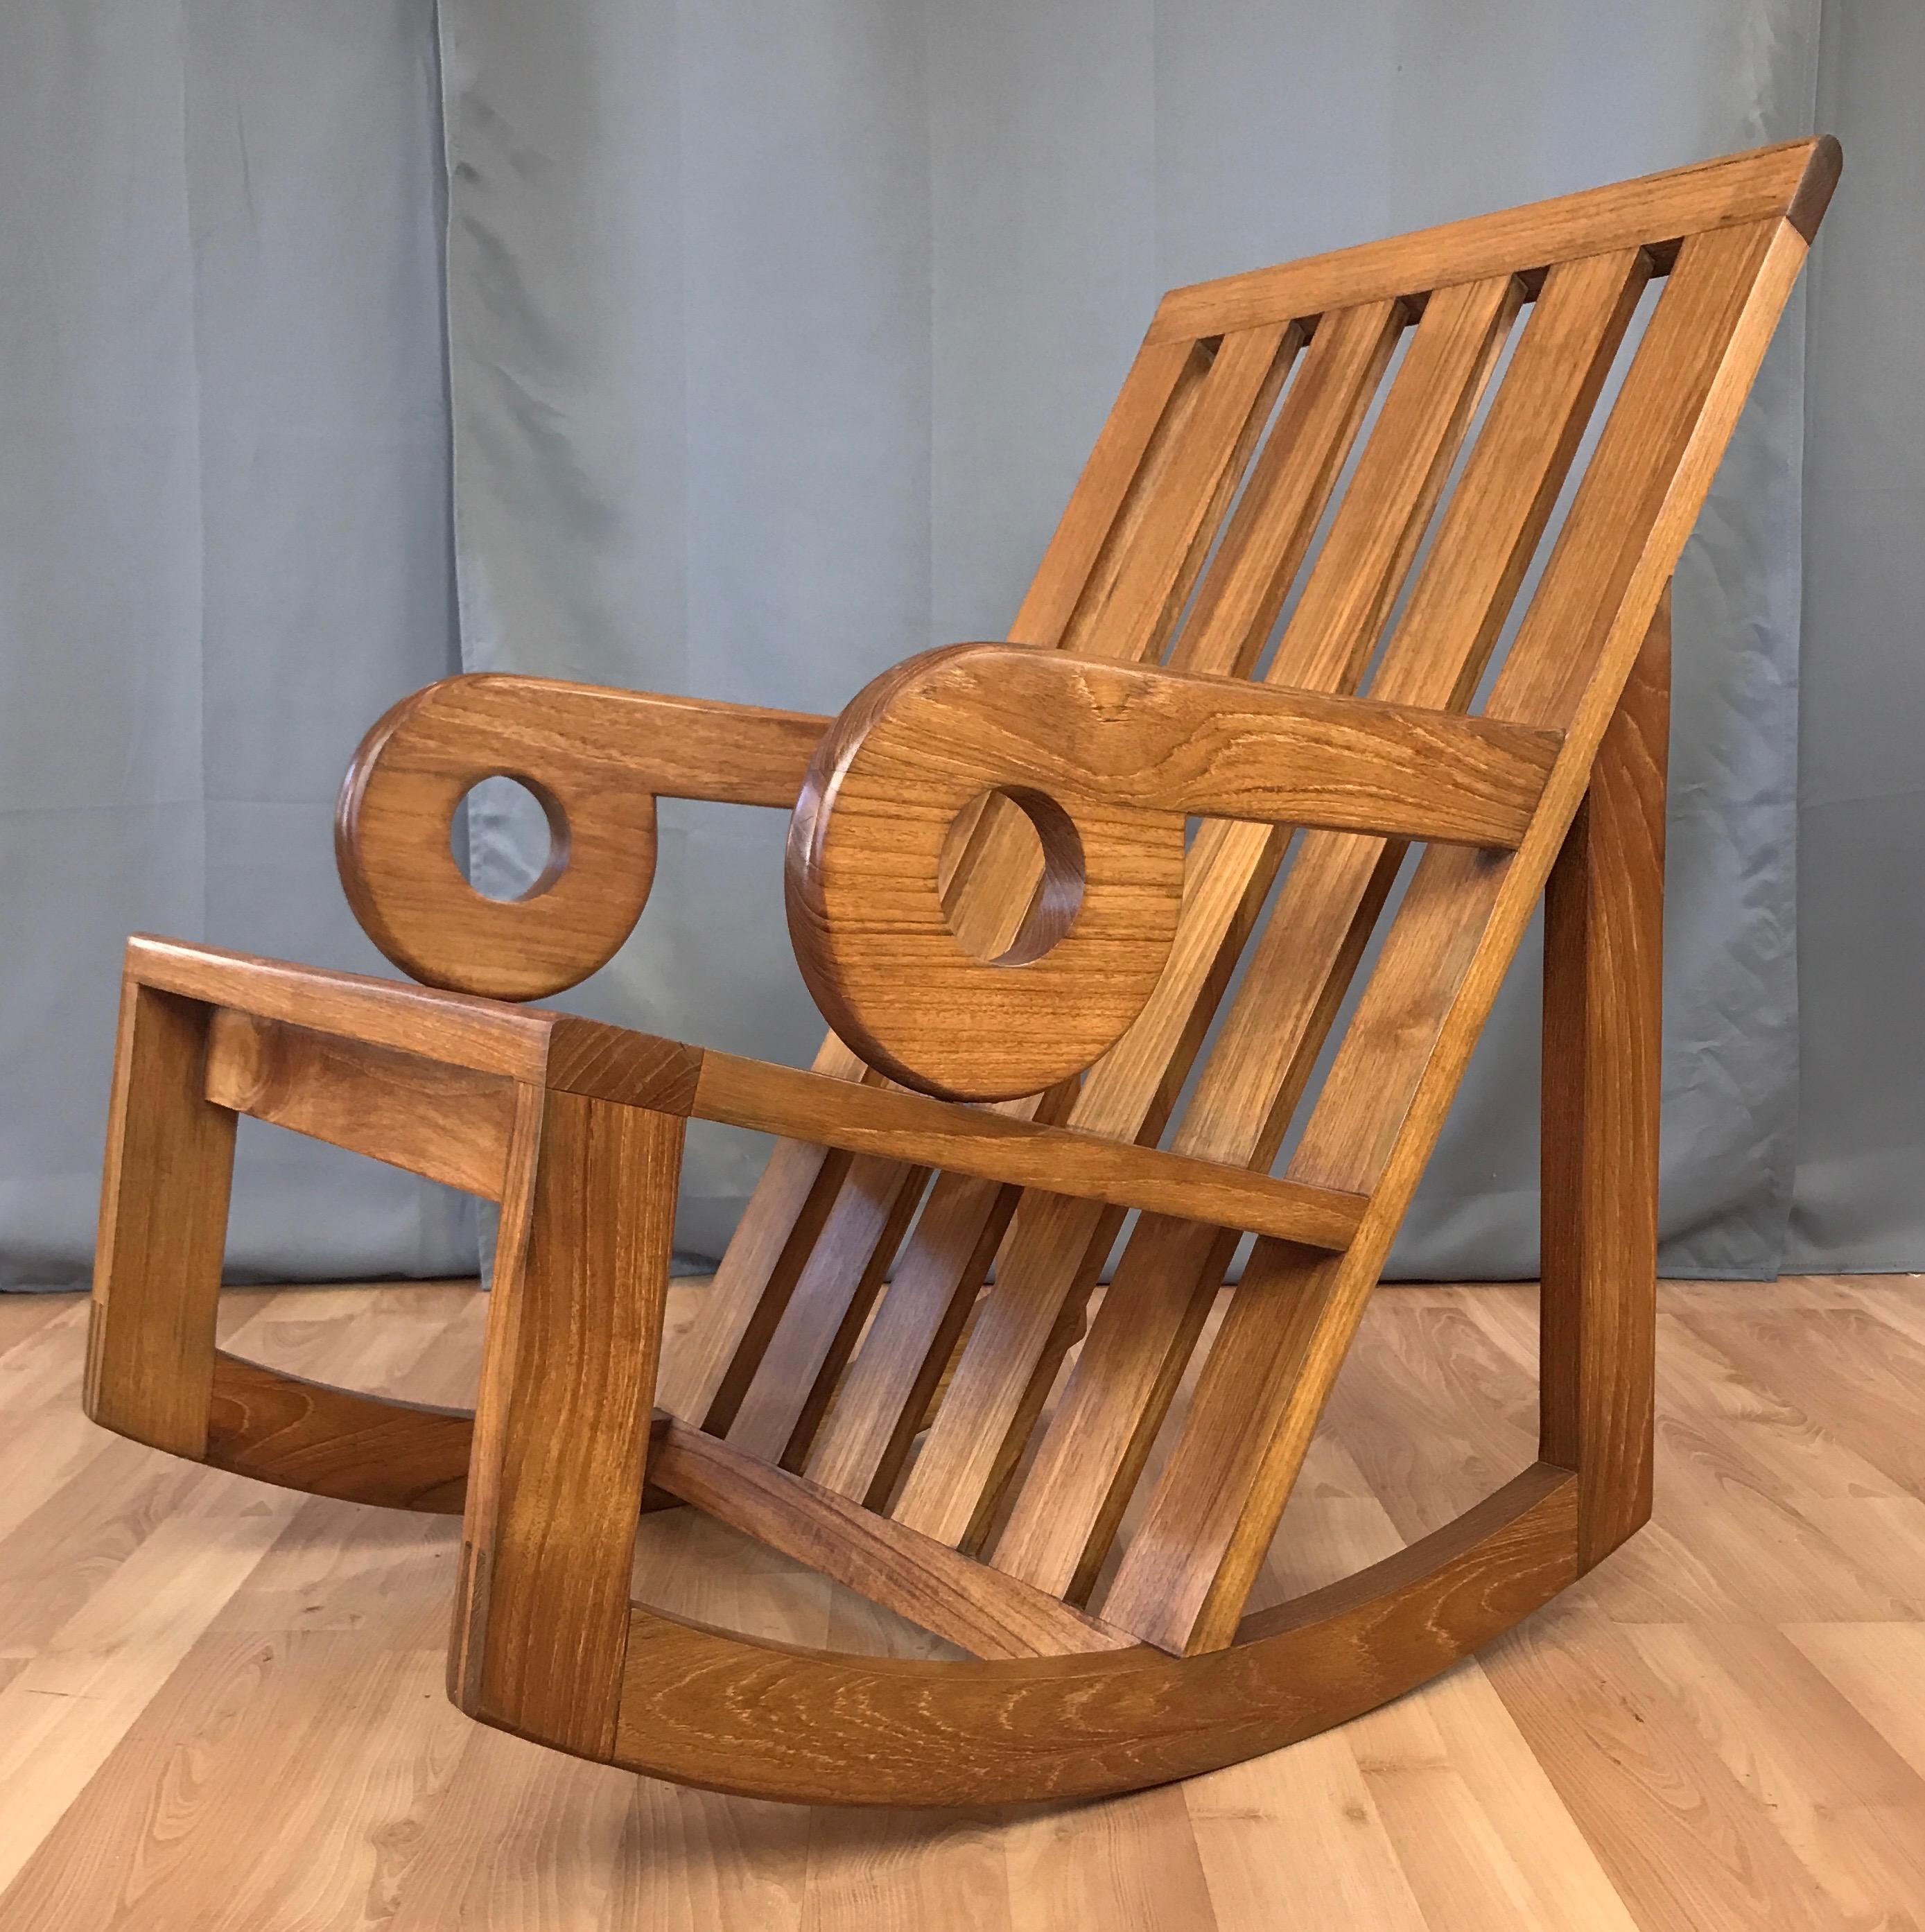 An early and rare AP288 Aperture rocker in teak by Monterey, California, designer, architect, and artist Kipp Stewart for Summit Furniture.

Impressively handcrafted of very substantial solid teak. Bold geometric lines and forms on display from